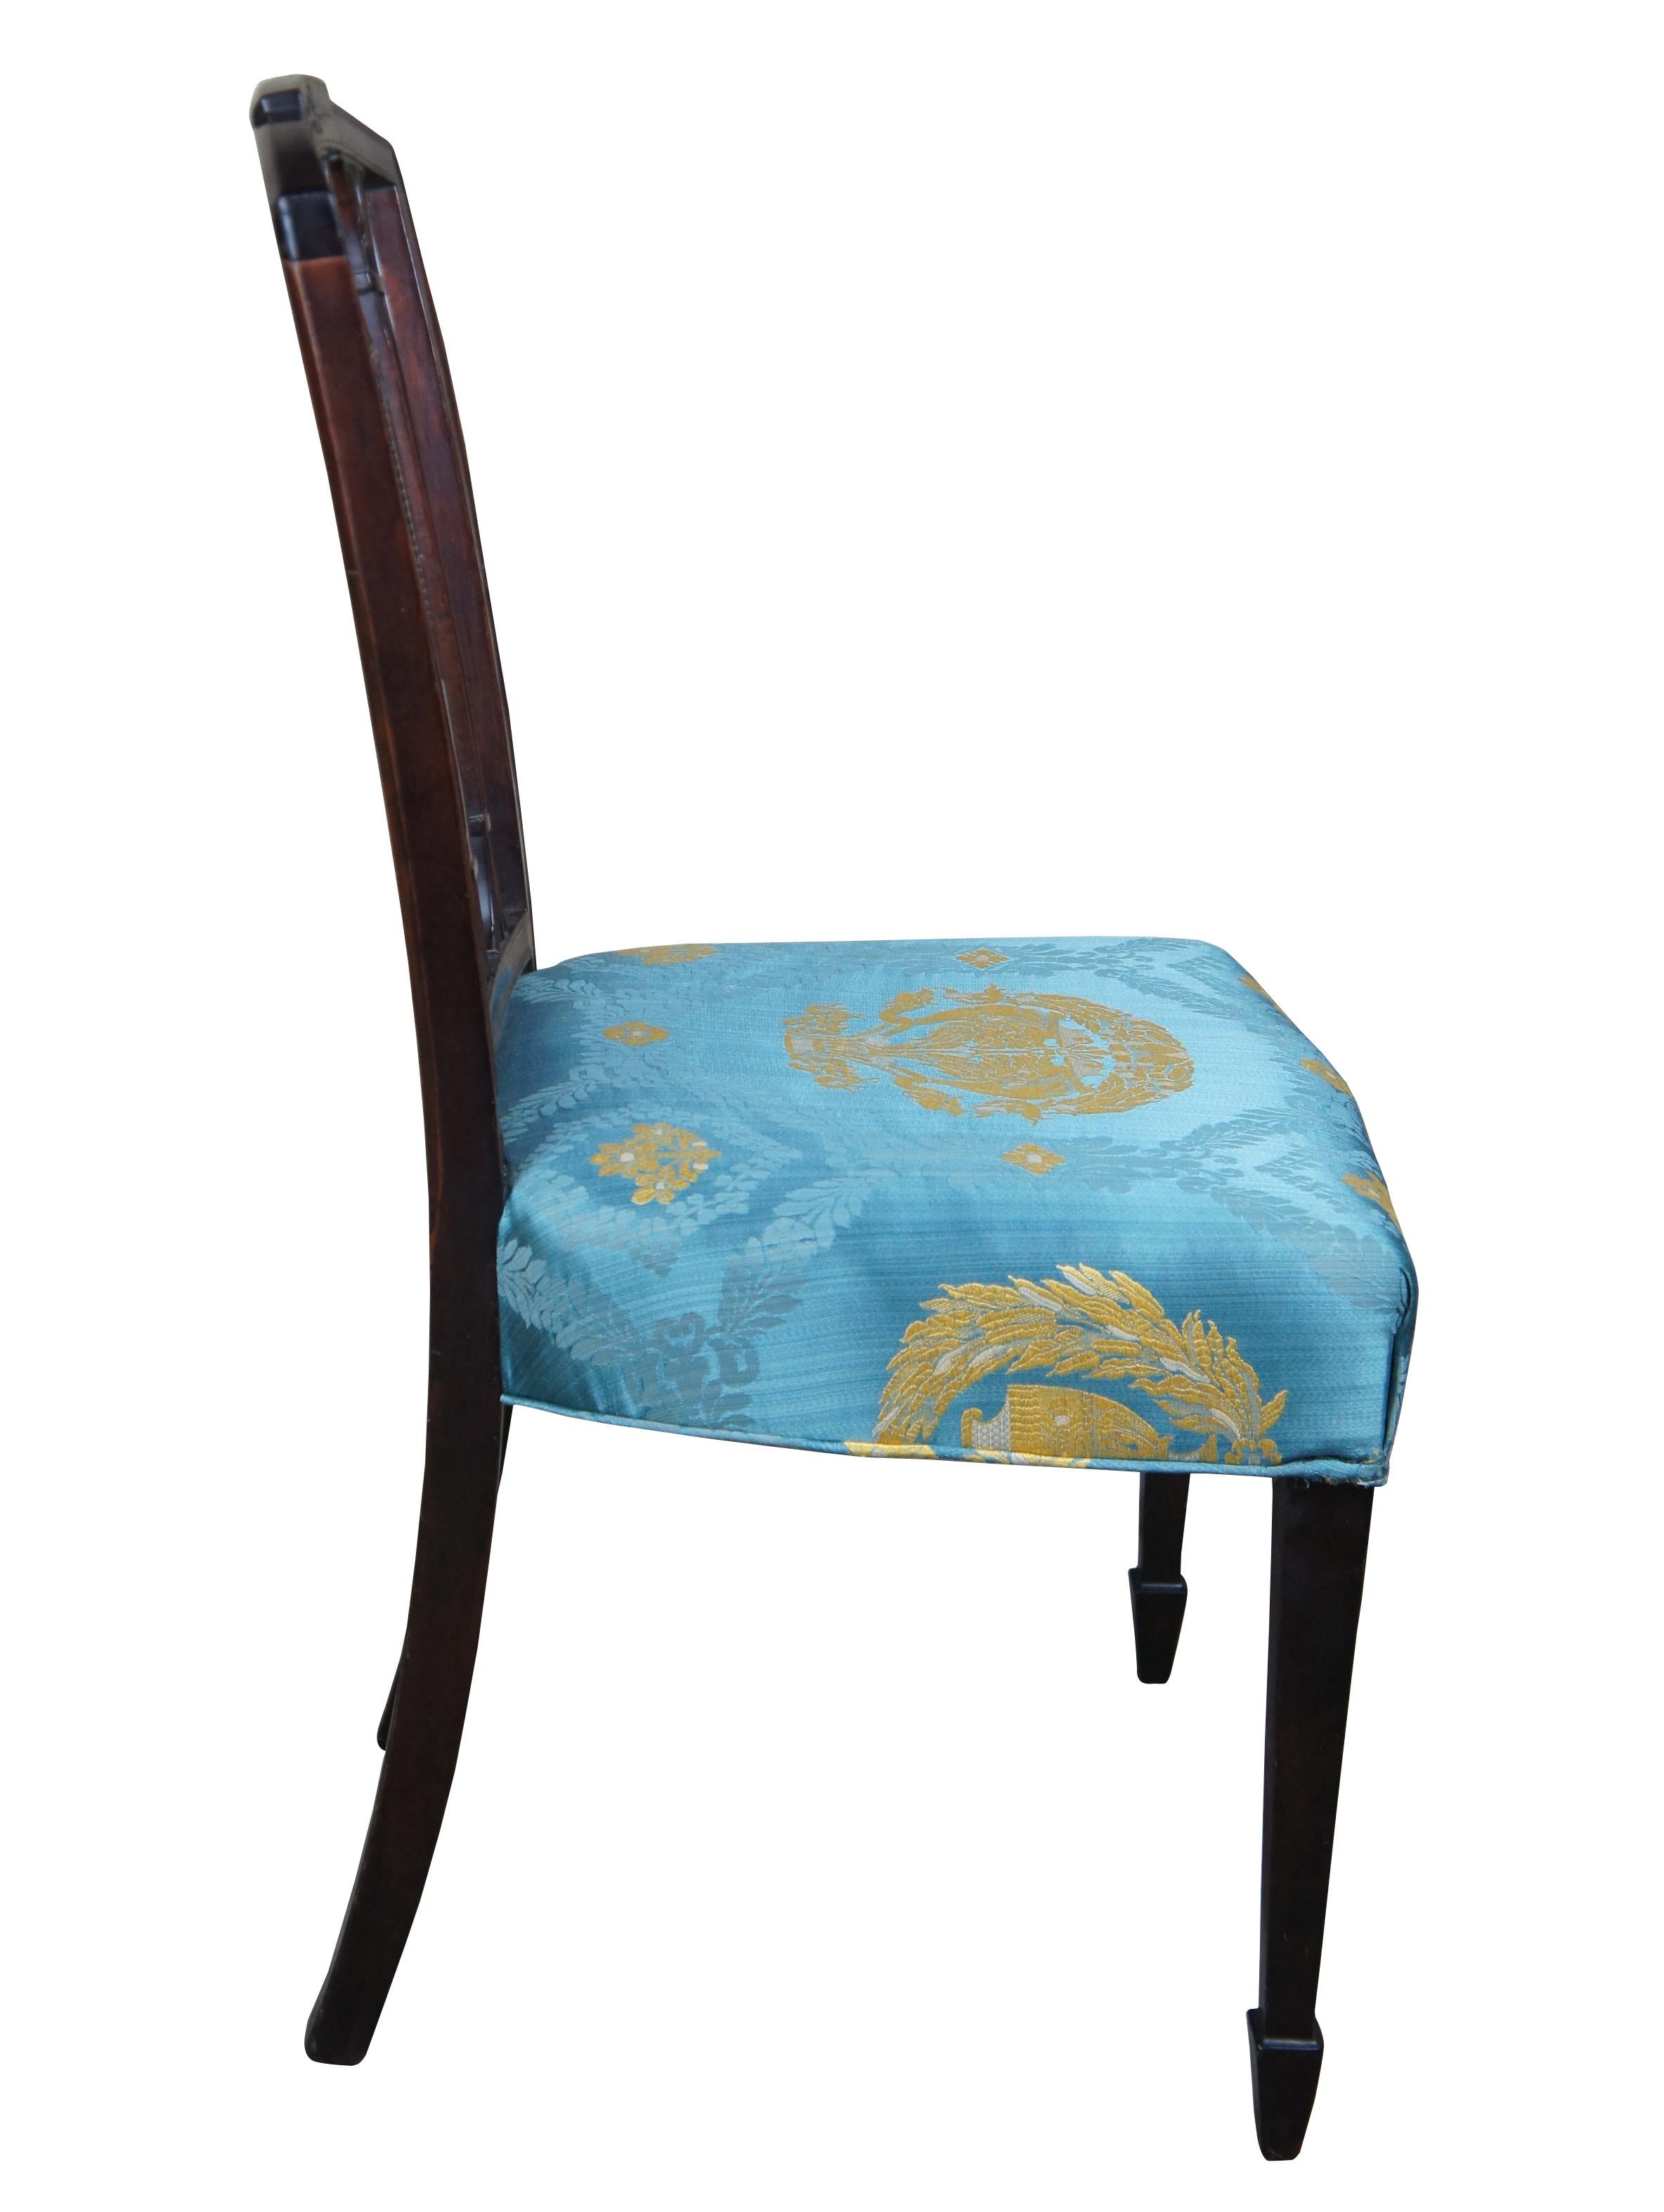 Antique Sheraton side chair. Features a carved and split back with neoclassical elements, leading to scalamadre seat with square tapered legs that lead to a spade foot.
  